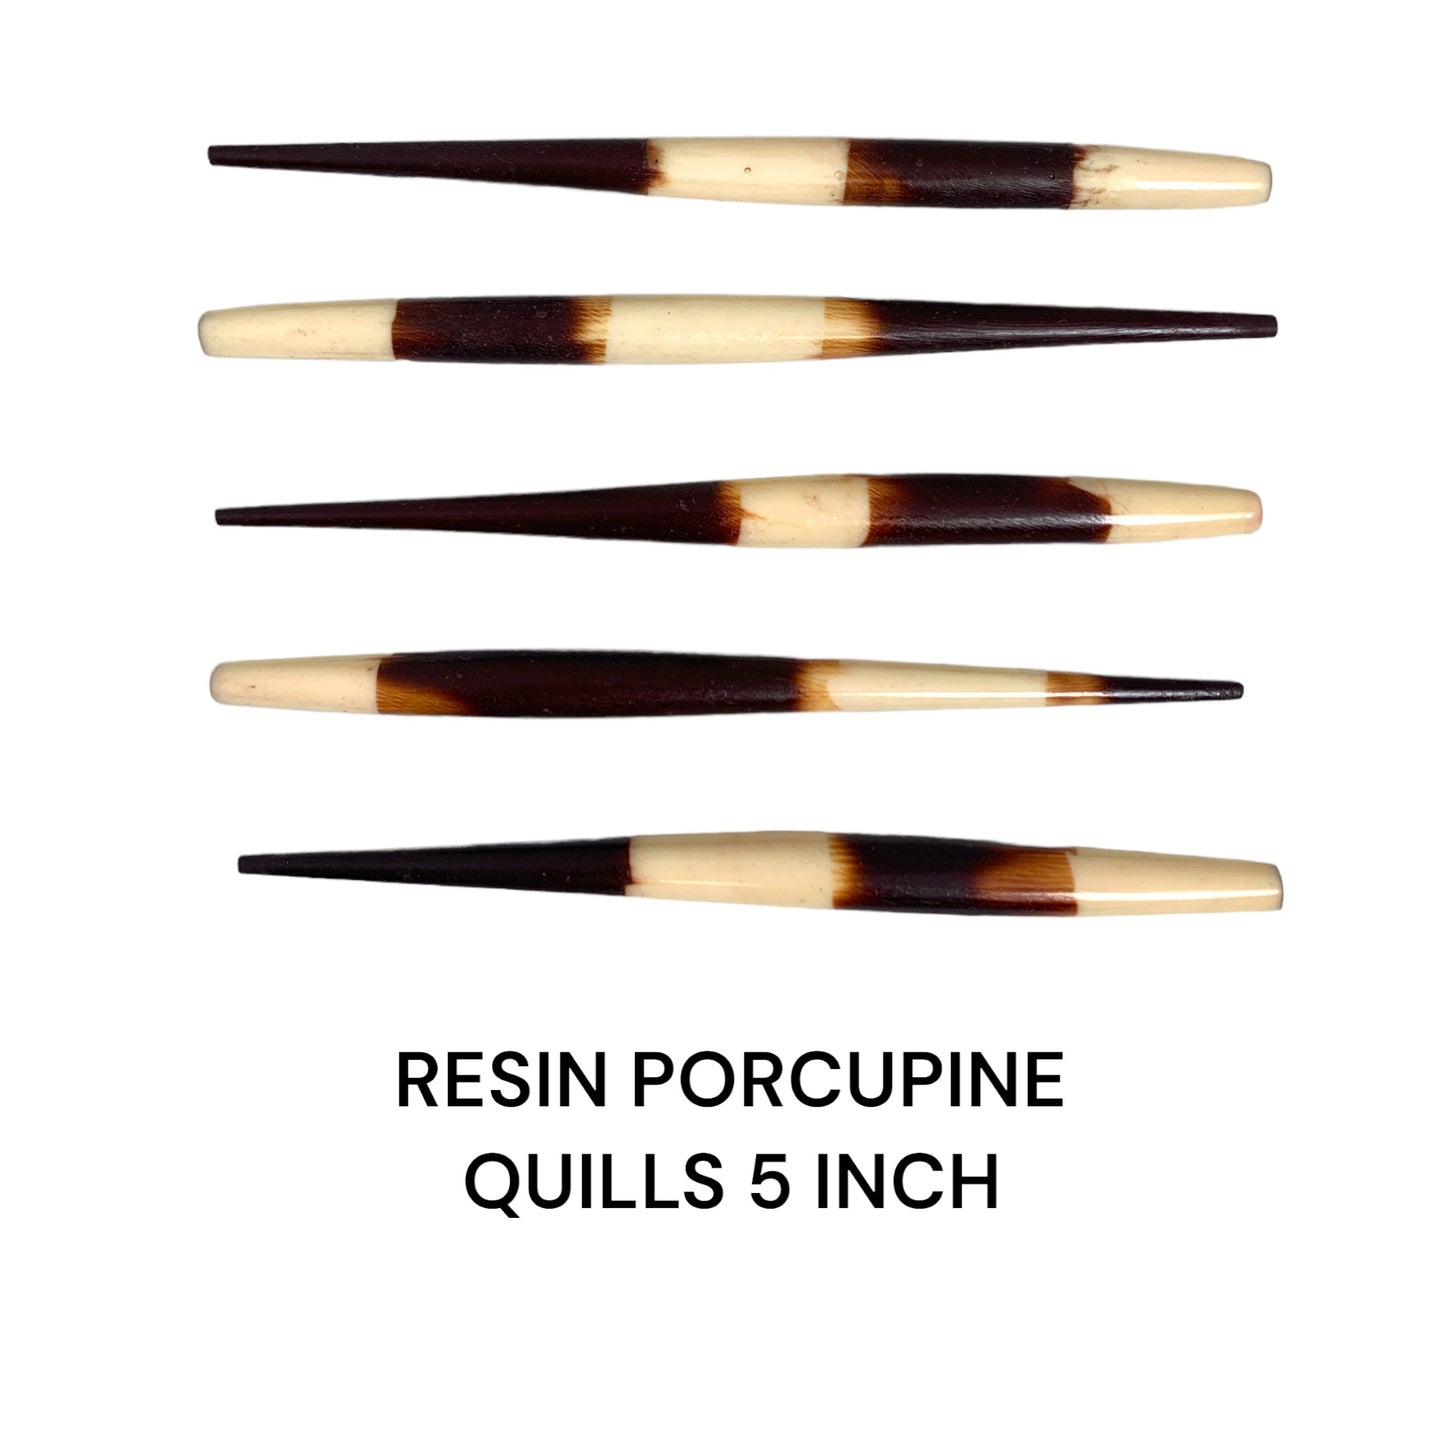 5 inch Resin Porcupine Quill - Premium Quality - Made in India - NEW523